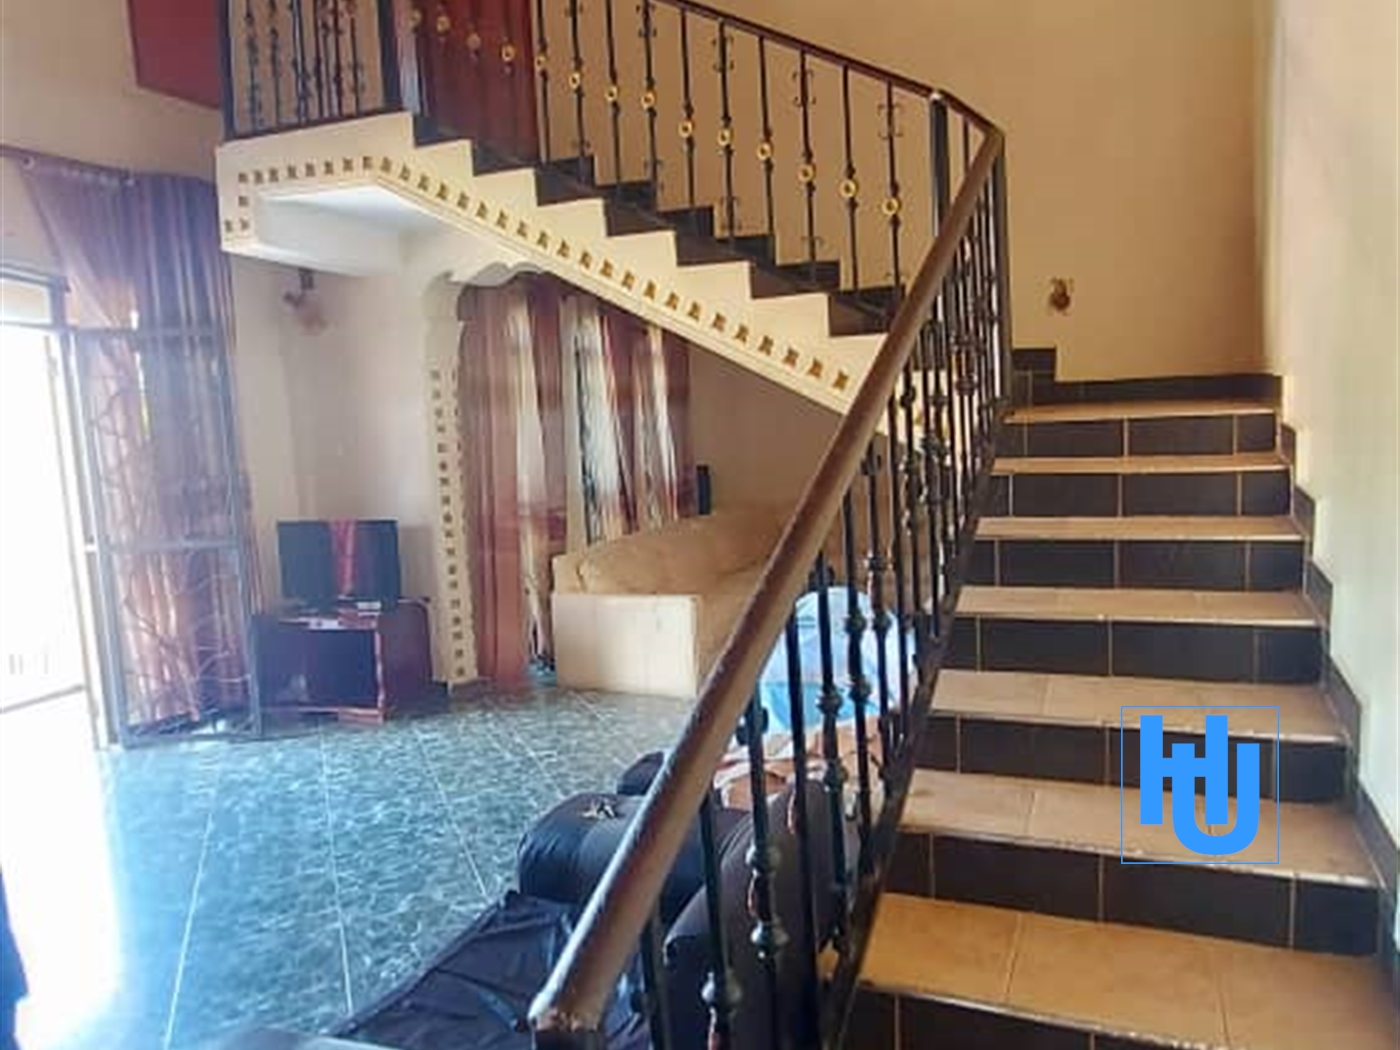 Mansion for sale in Ndejje Wakiso